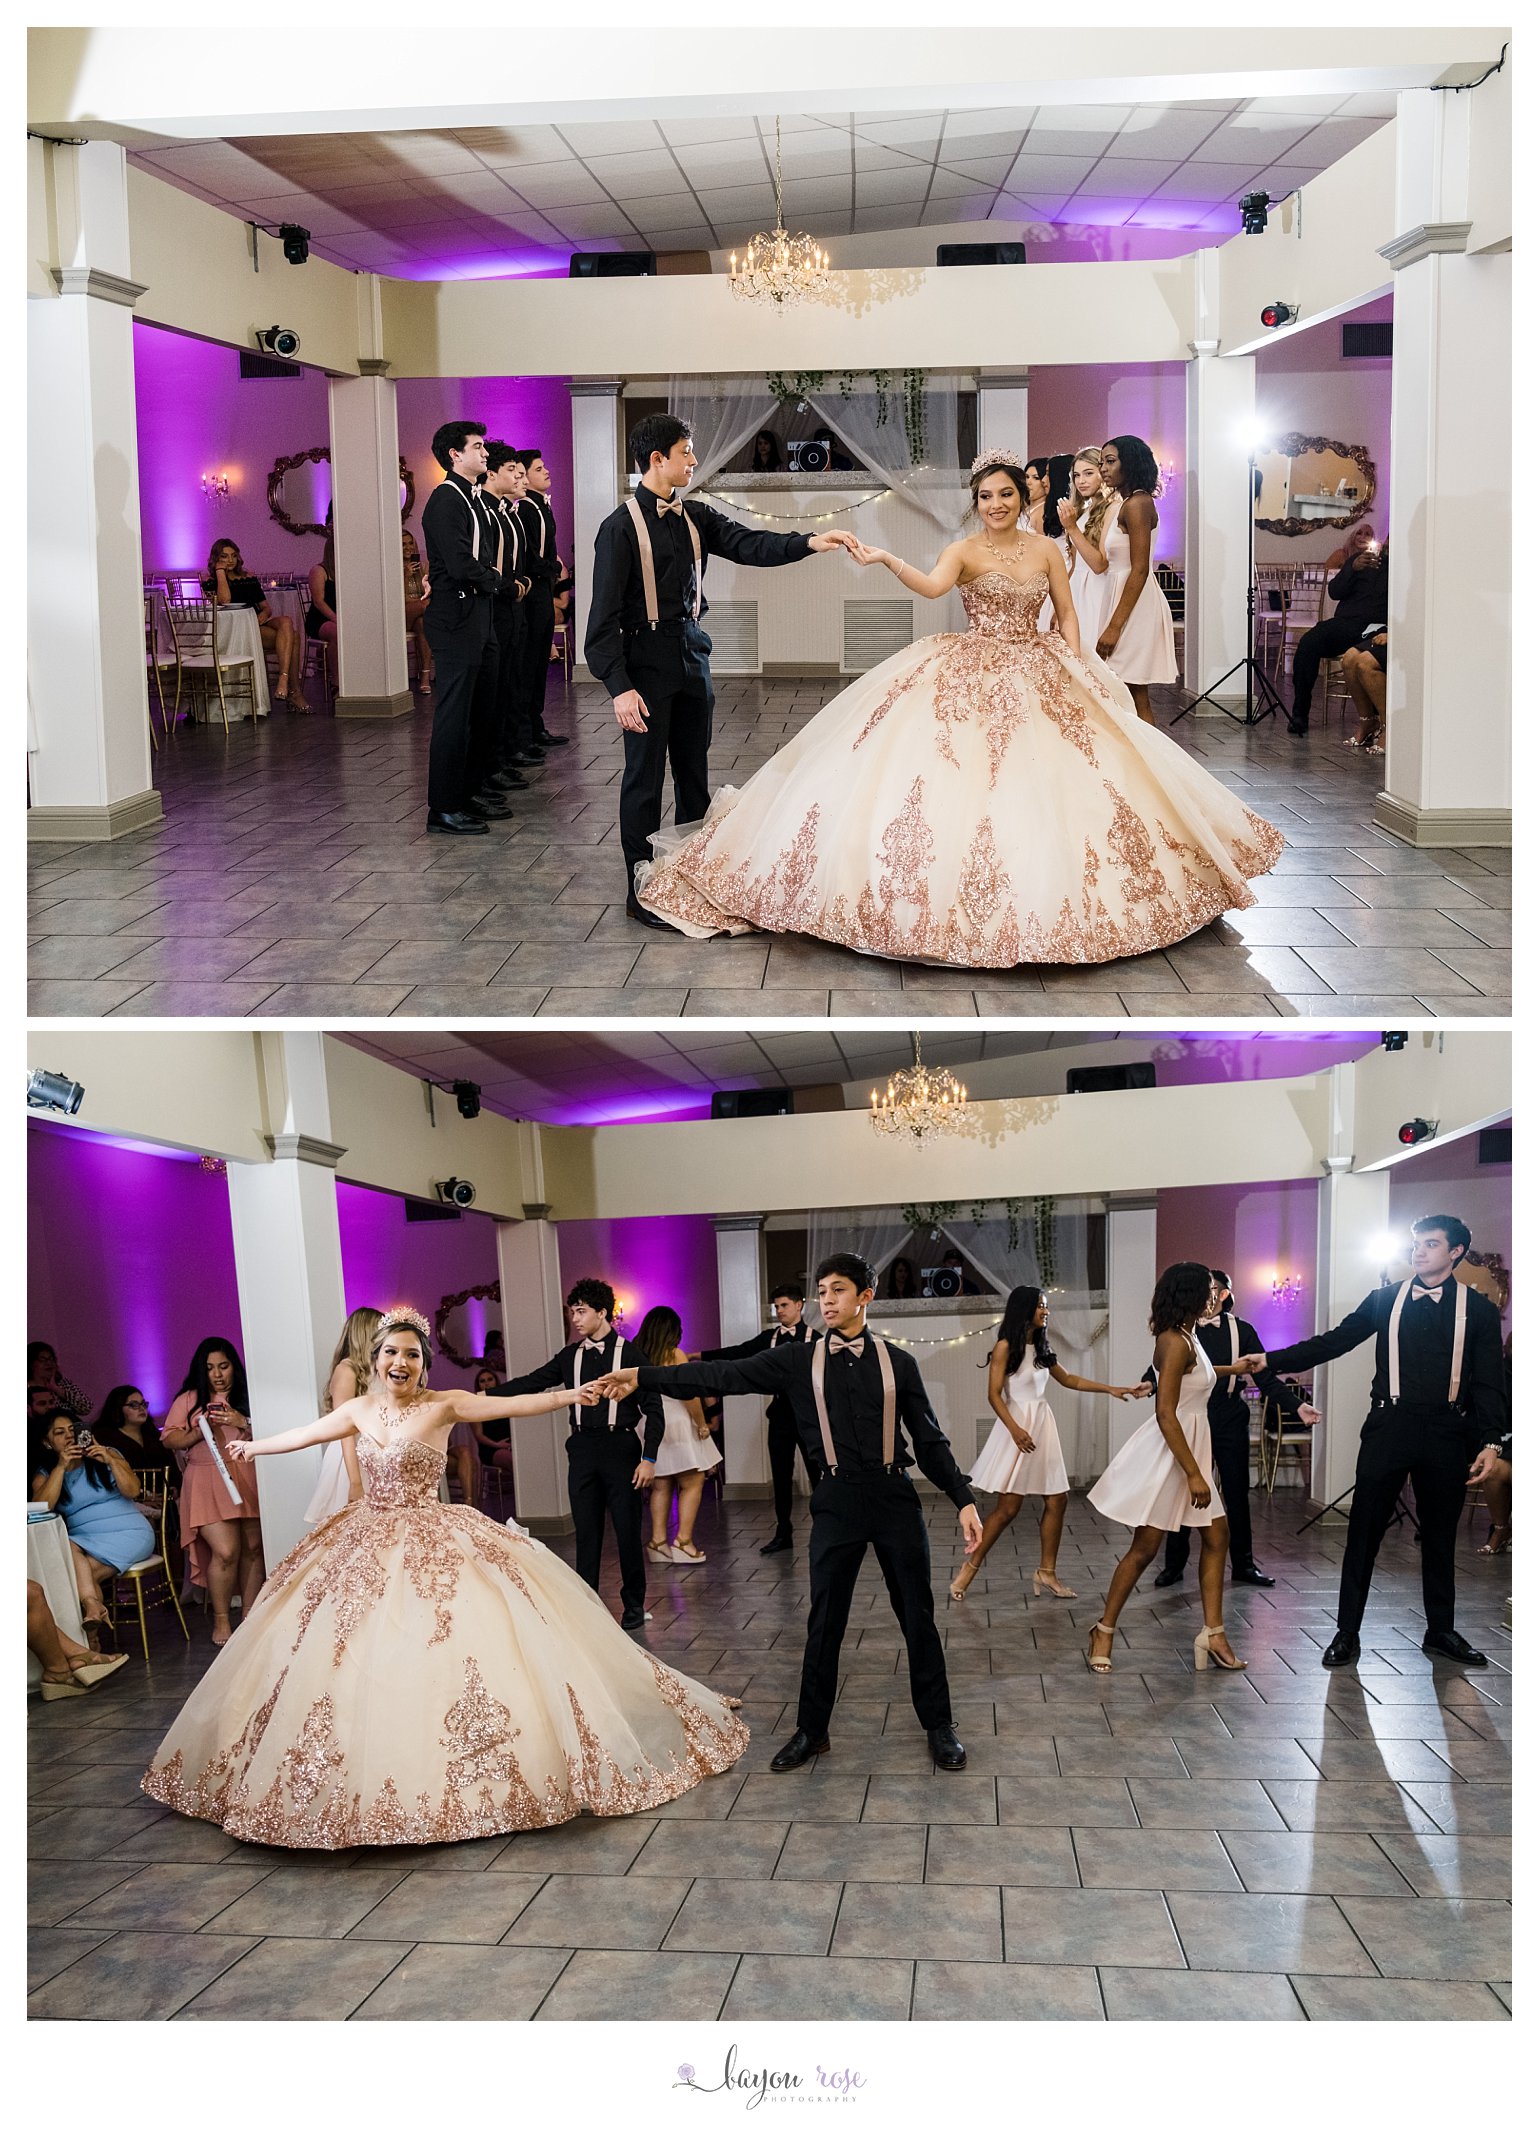 quinceanera dance with her court